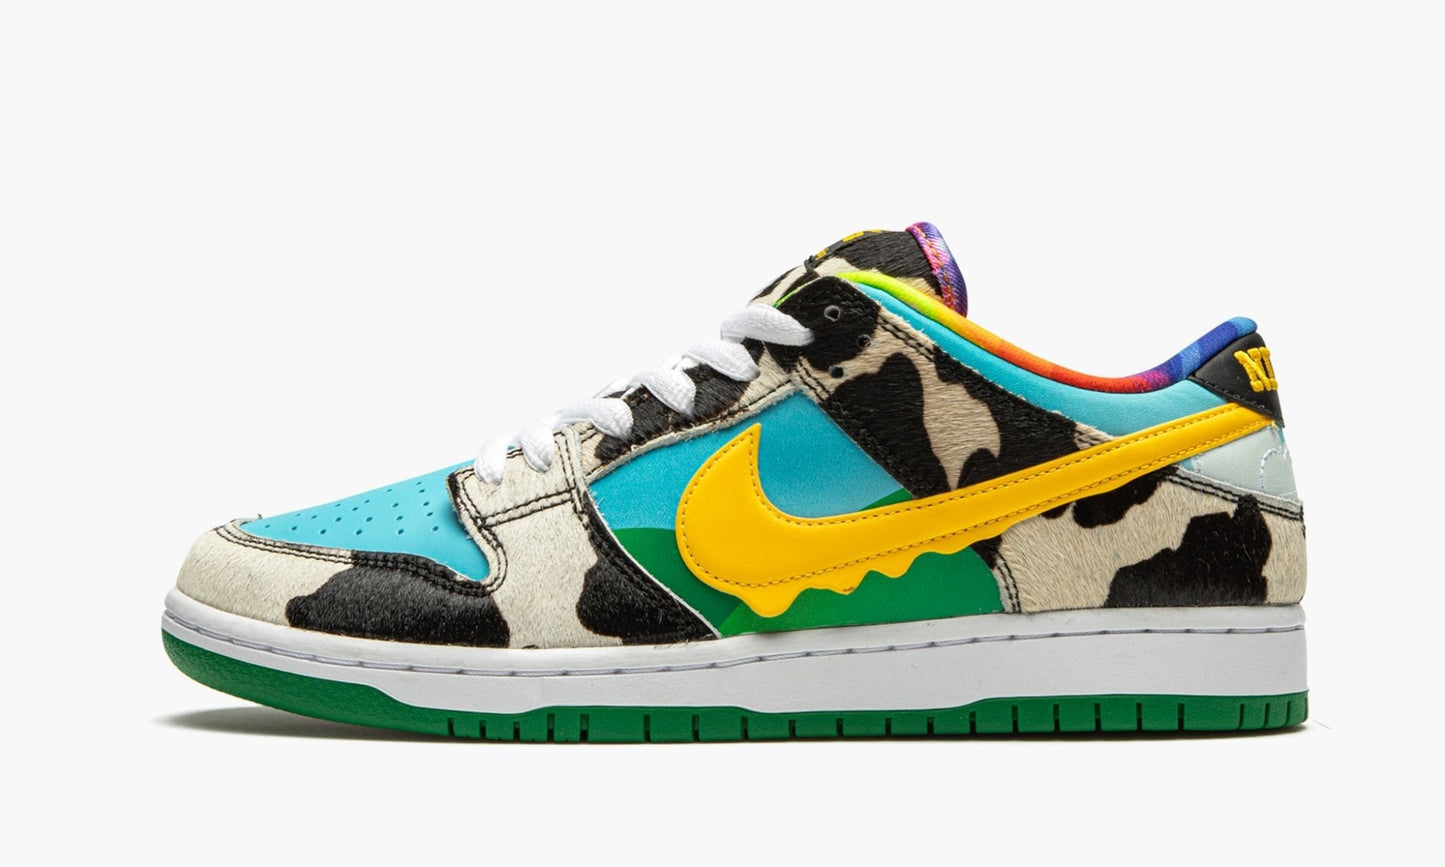 SB Dunk Low "Ben & Jerry's - Chunky Dunky"